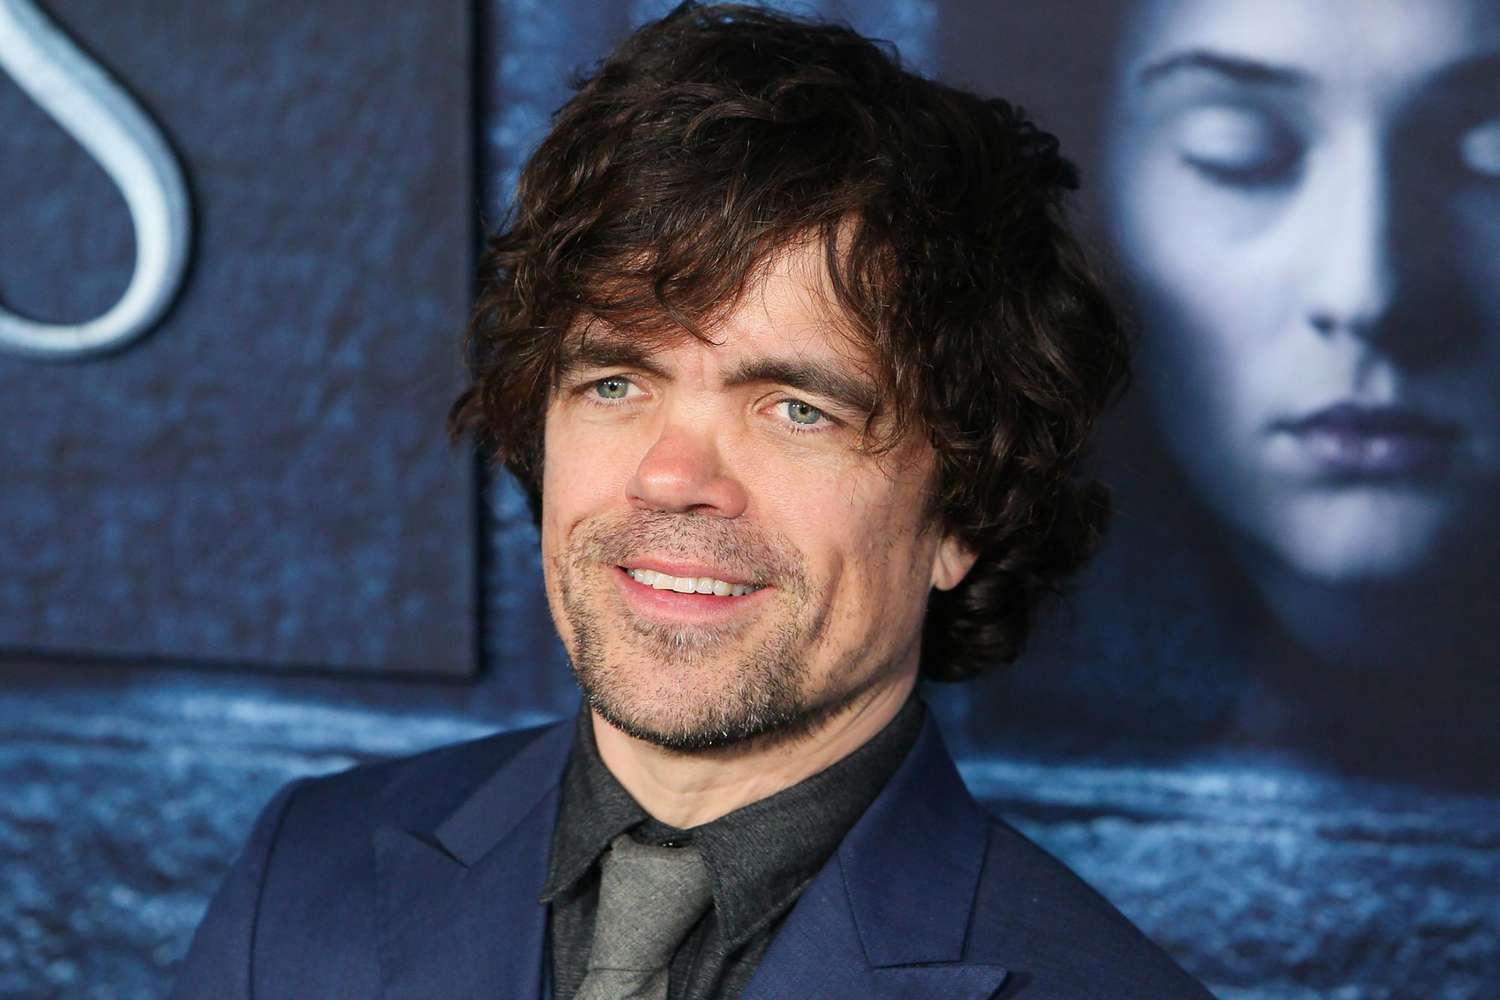 Peter Dinklage slams Disney's live-action 'Snow White' remake: 'What the f--- are you doing?'